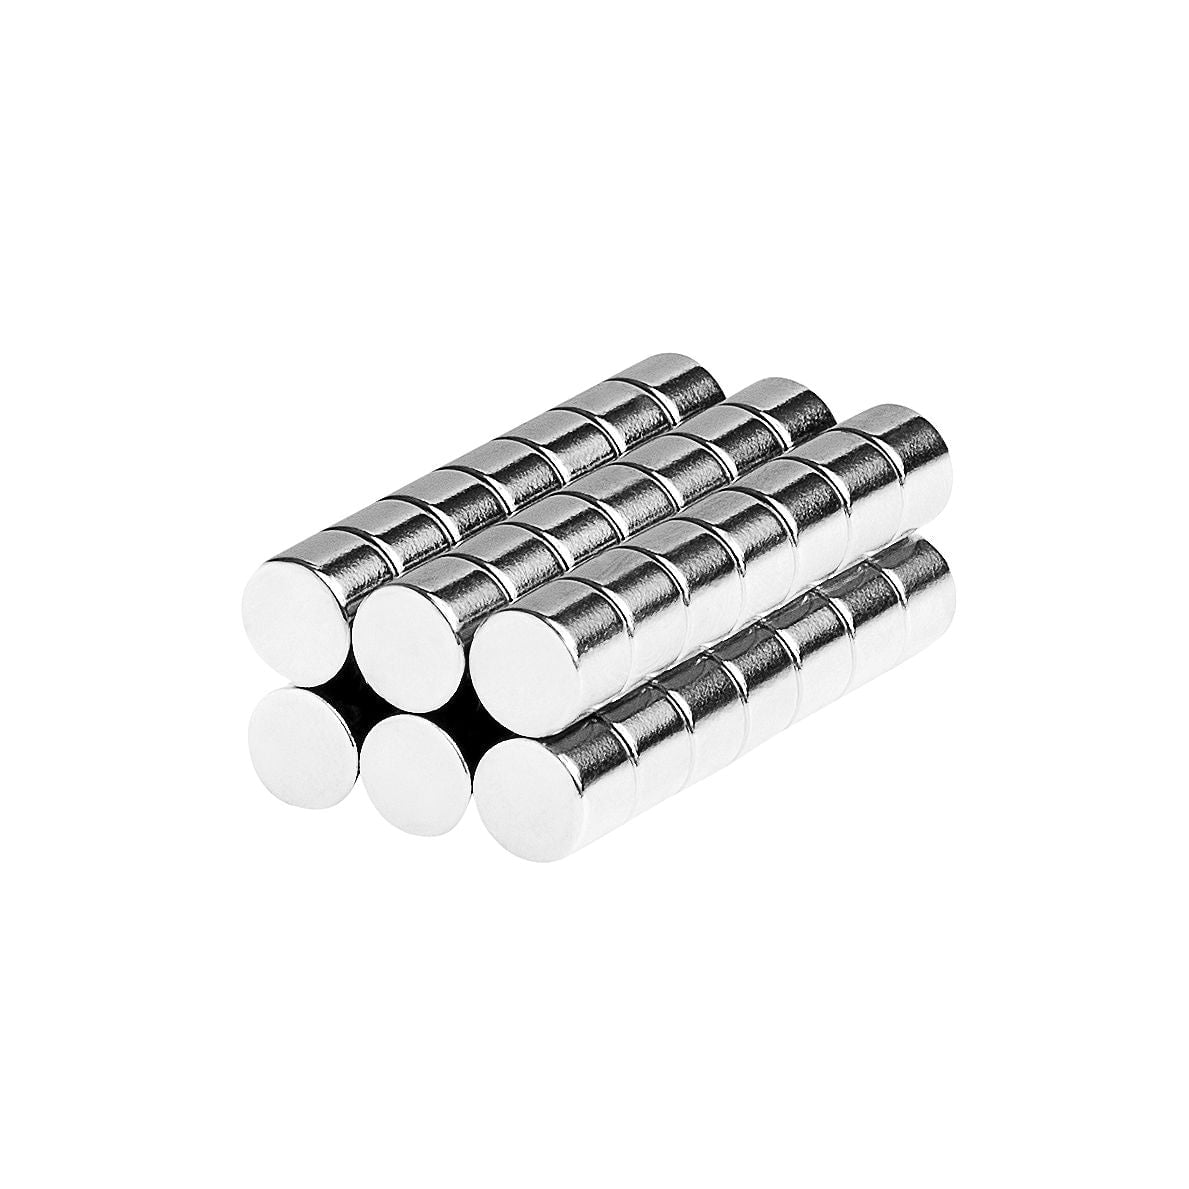 2 VERY SUPER ULTRA STRONG NEODYMIUM MAGNETS 1"x1" x 3/16" SQUARE-FREE SHIPING 